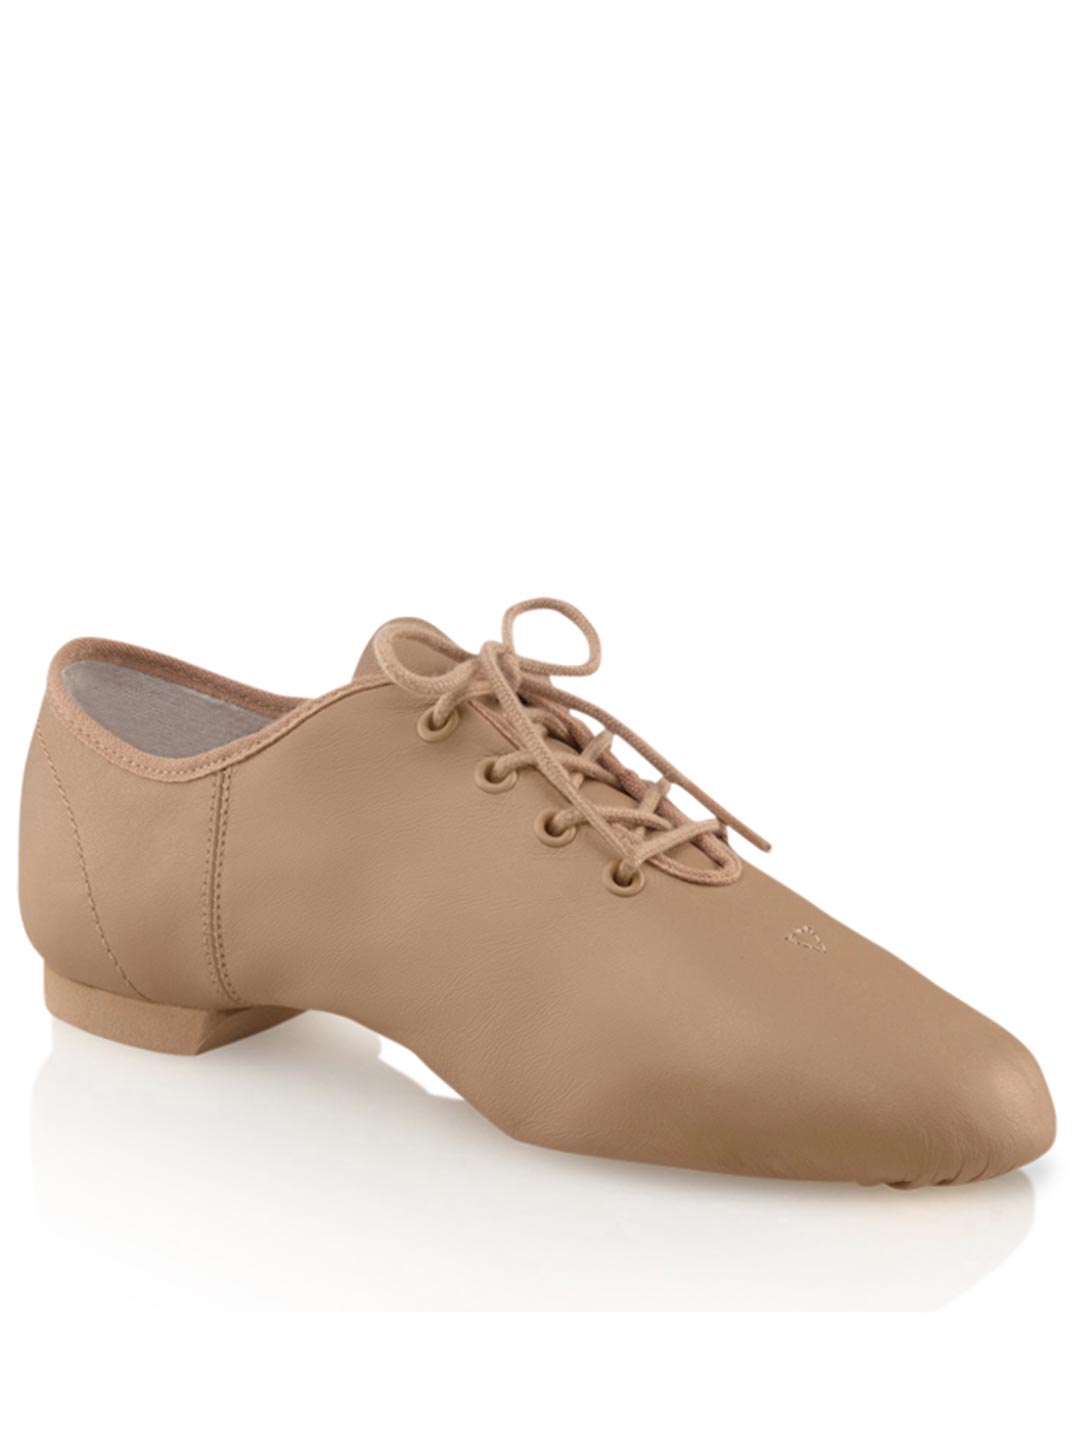 E-Series Tie-Up Jazz Oxford Shoe in Caramel